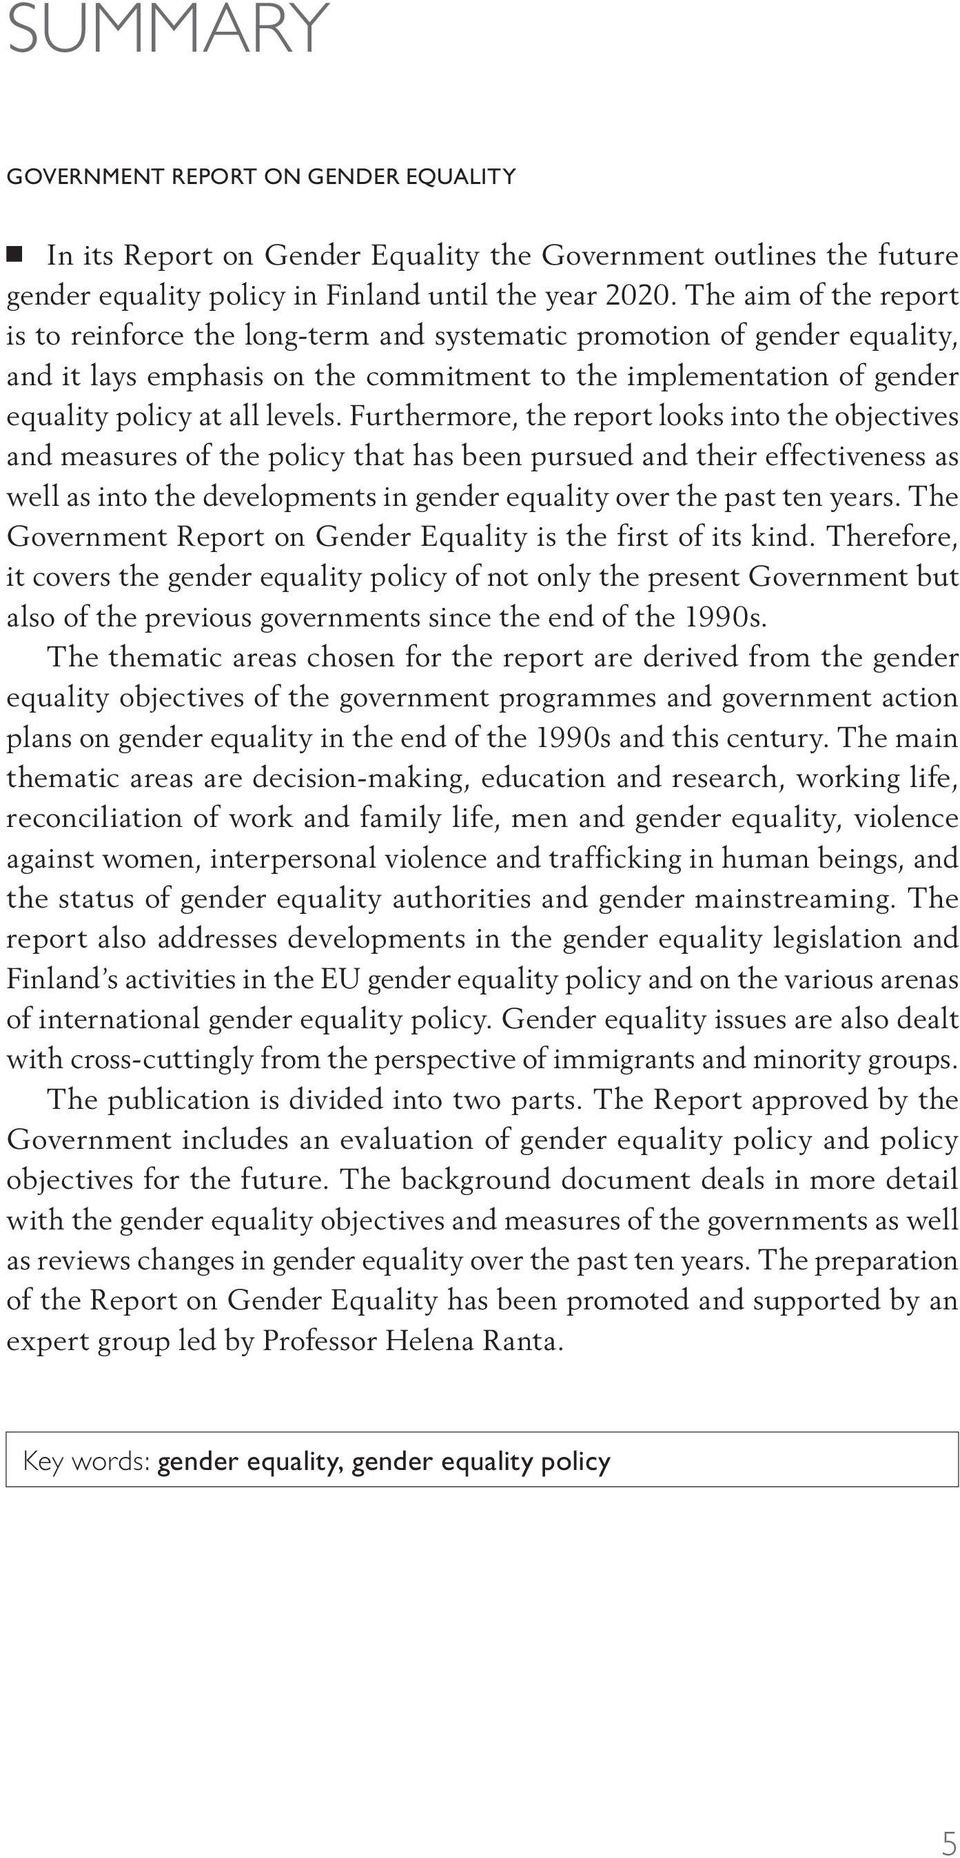 Furthermore, the report looks into the objectives and measures of the policy that has been pursued and their effectiveness as well as into the developments in gender equality over the past ten years.